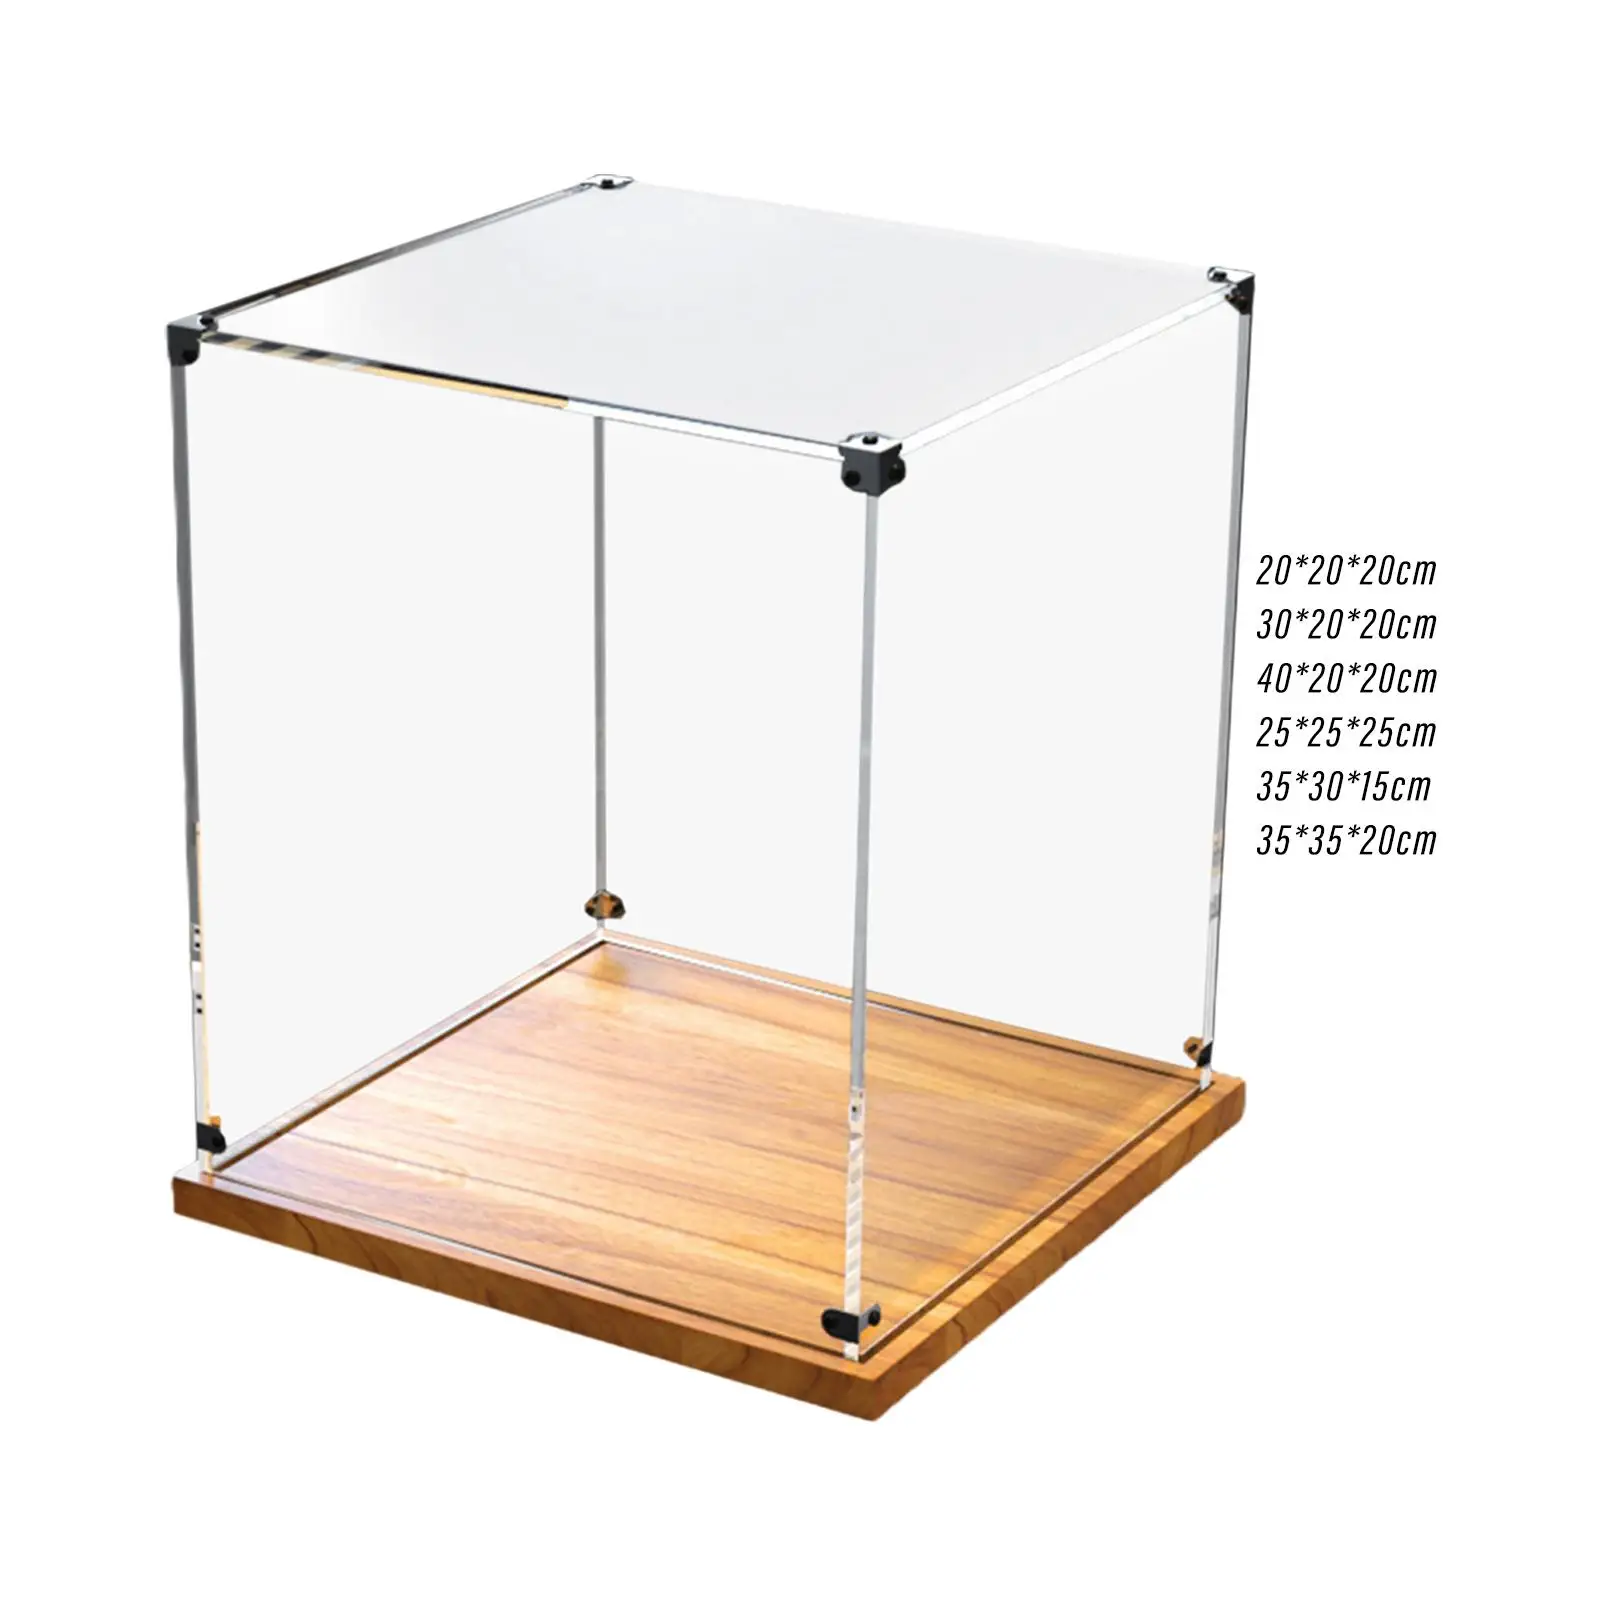 Transparent Display Box Decorative with Wooden Base Practical Stable Storage Organizer for Miniature Figurines Model Living Room